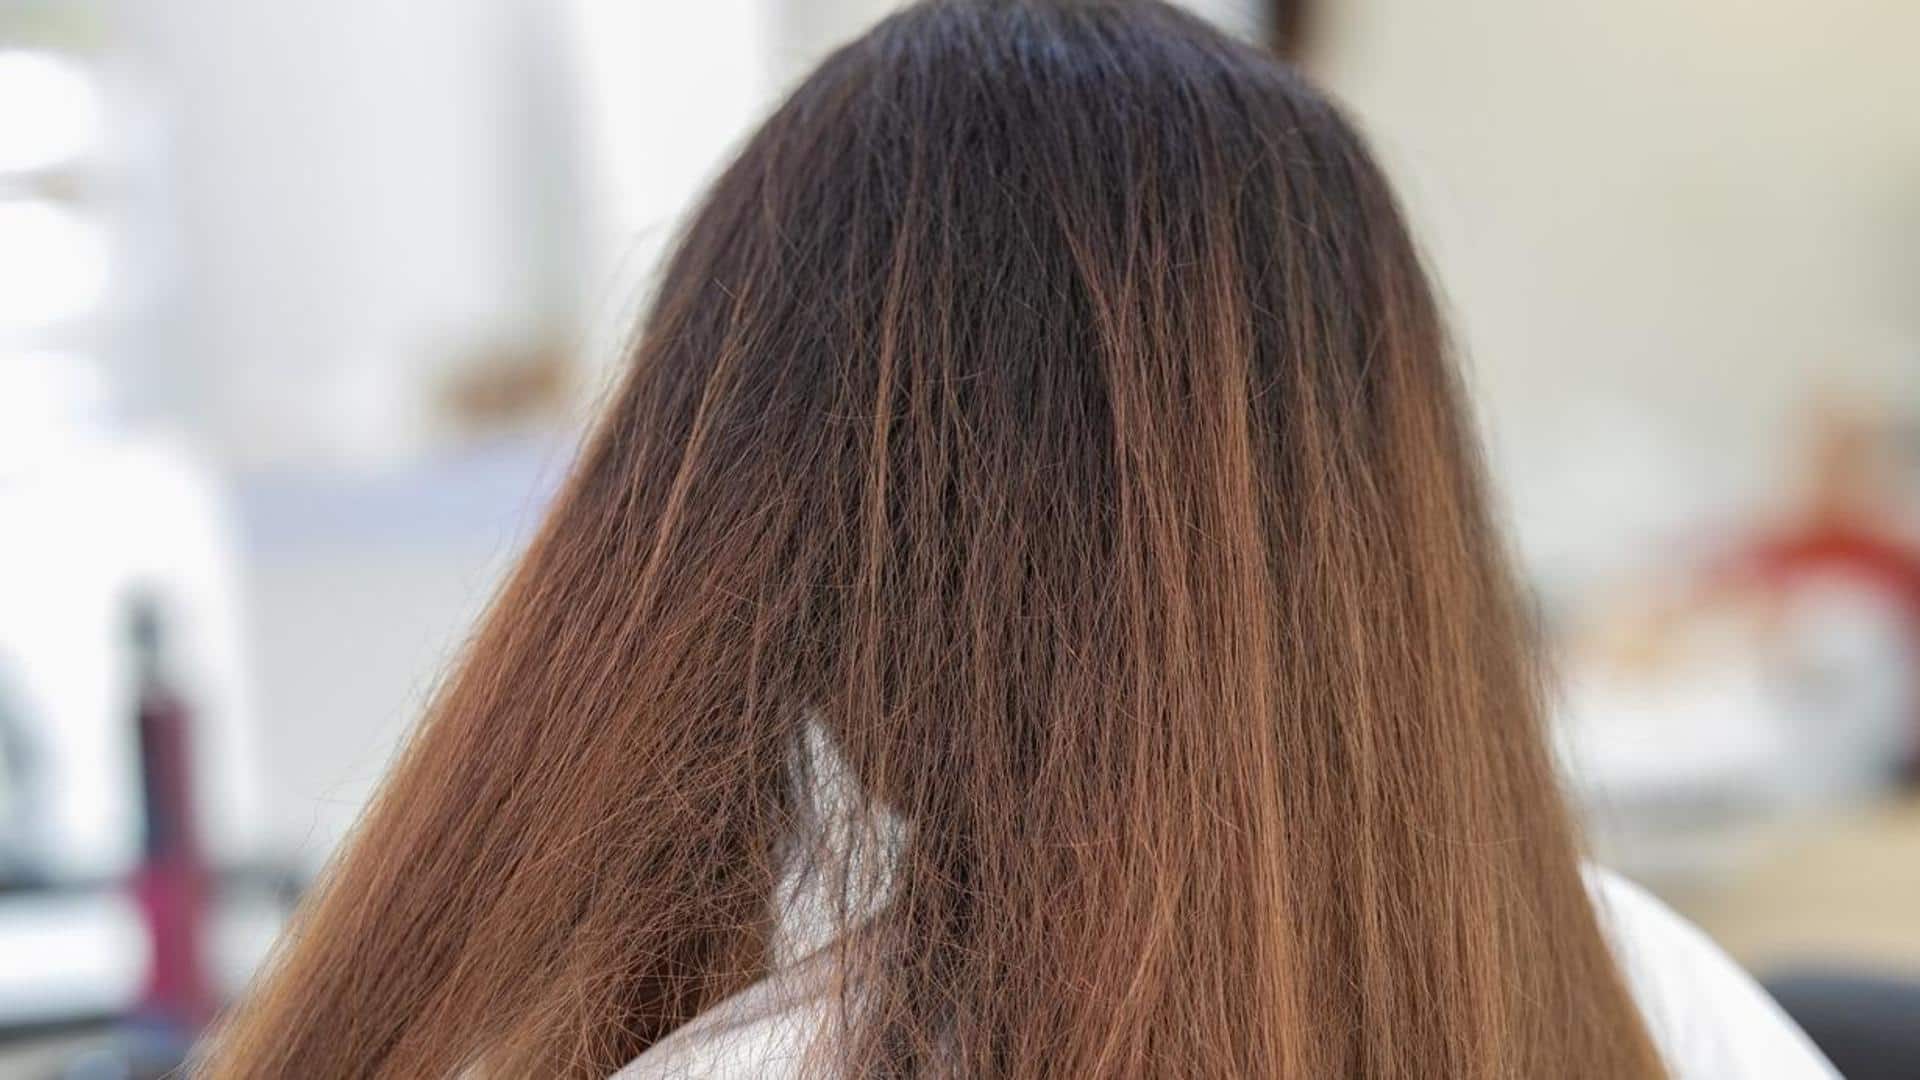 Tired of your frizzy baby hair? Try these tips